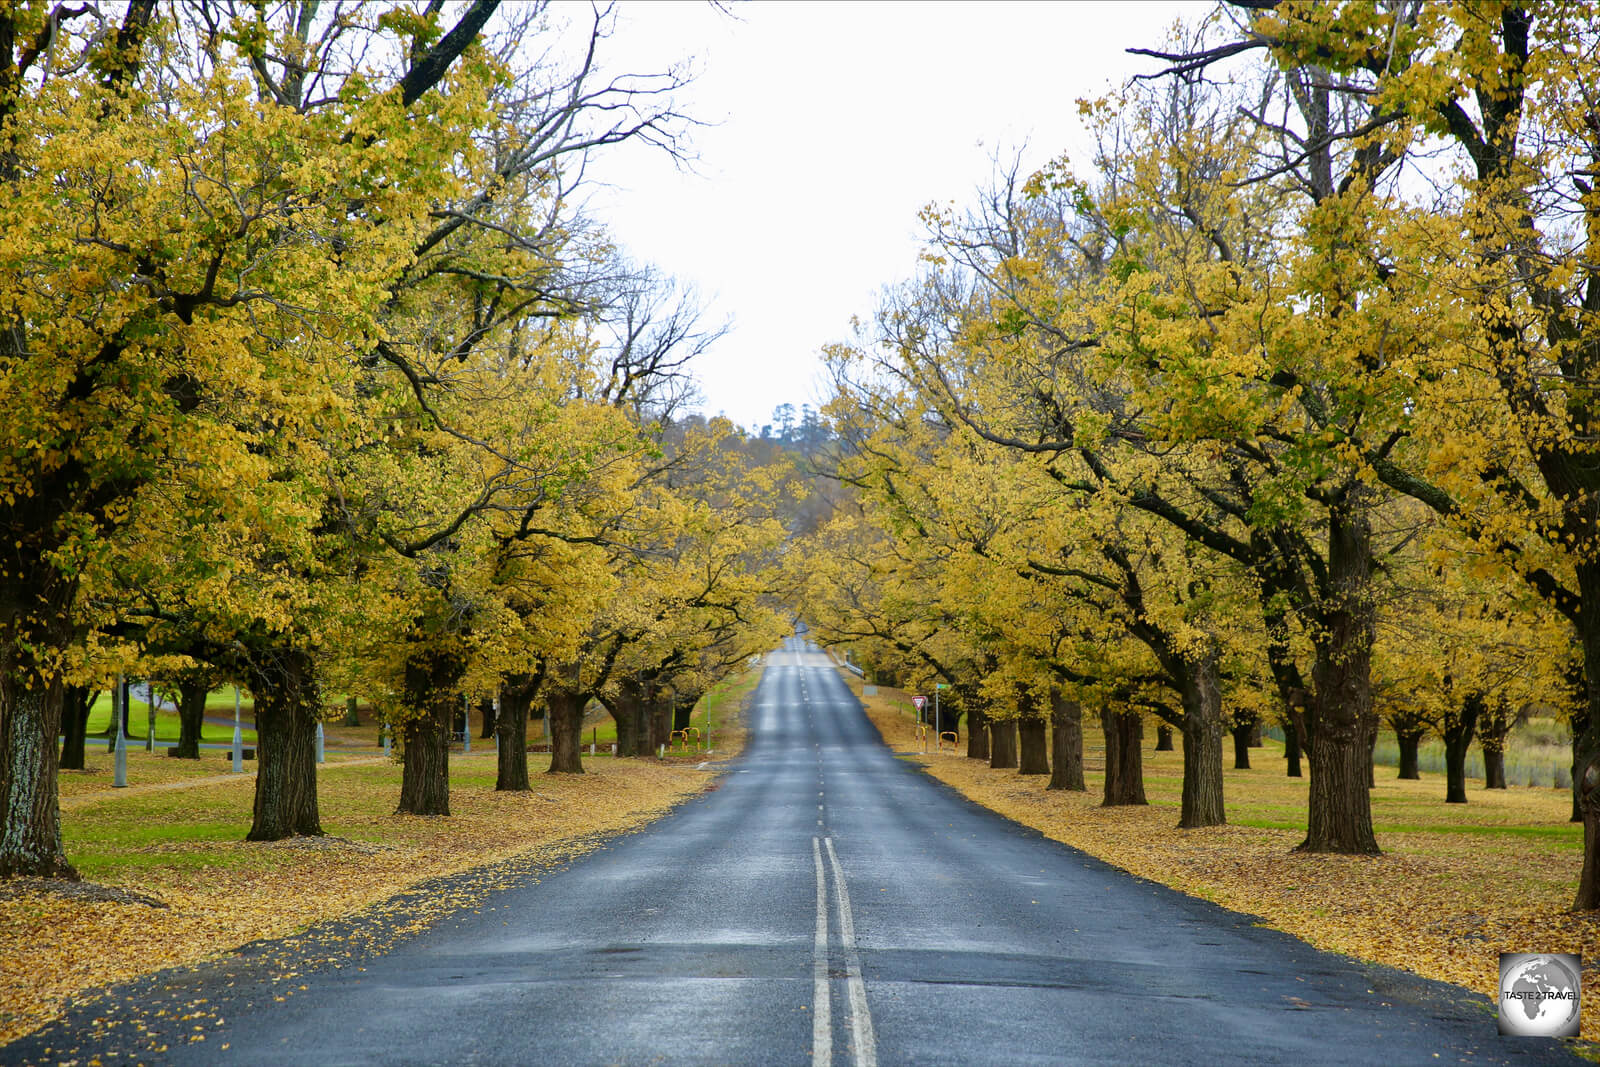 Autumn Leaves in the New England region, Armidale, NSW